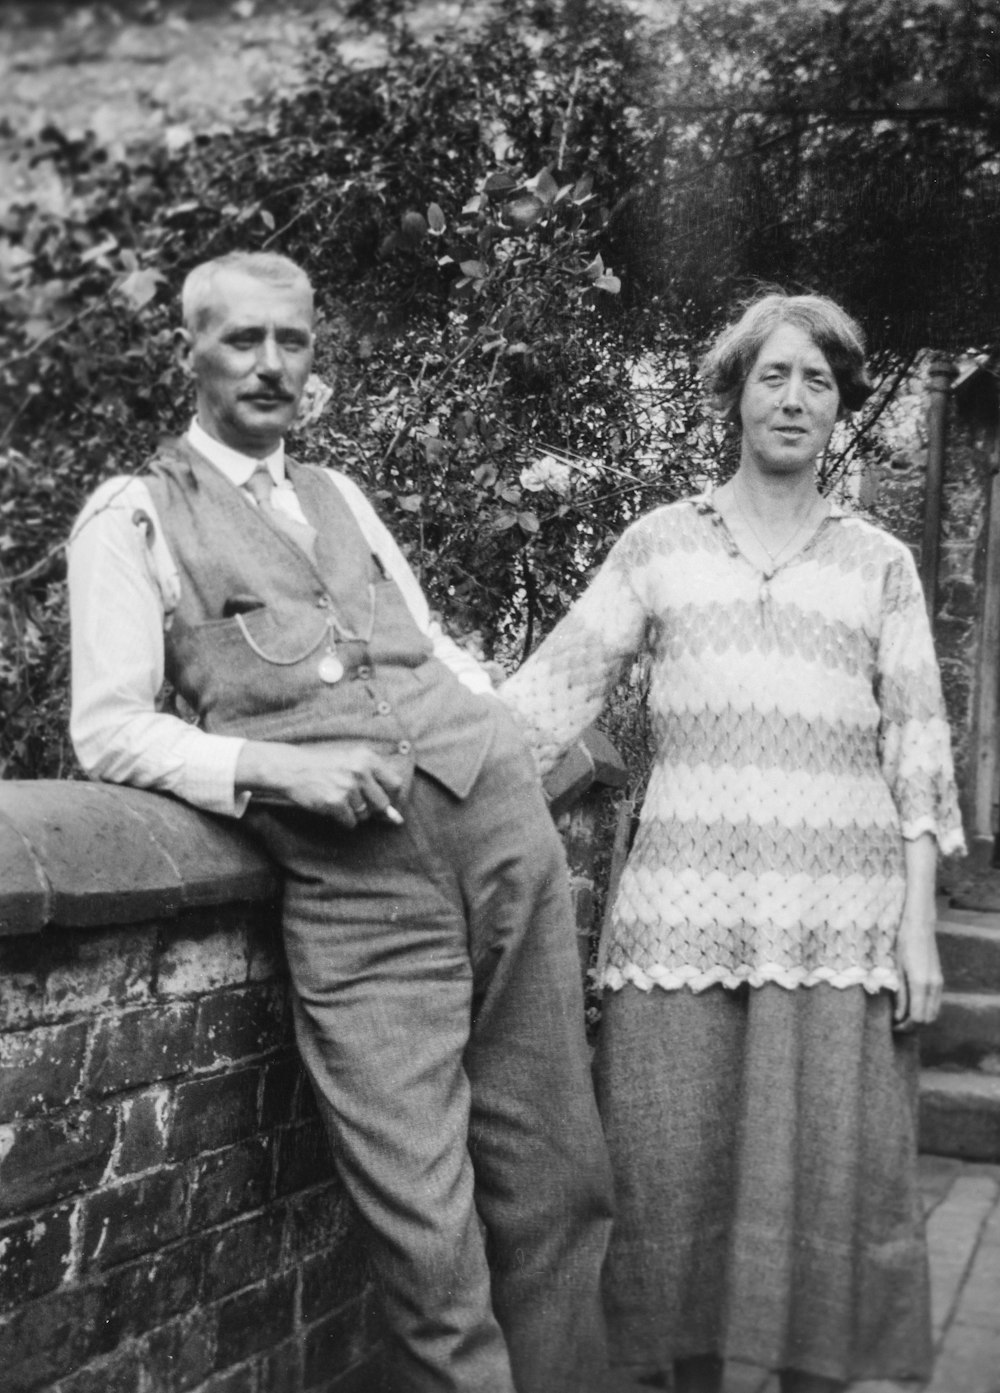 an old photo of a man and woman leaning against a wall